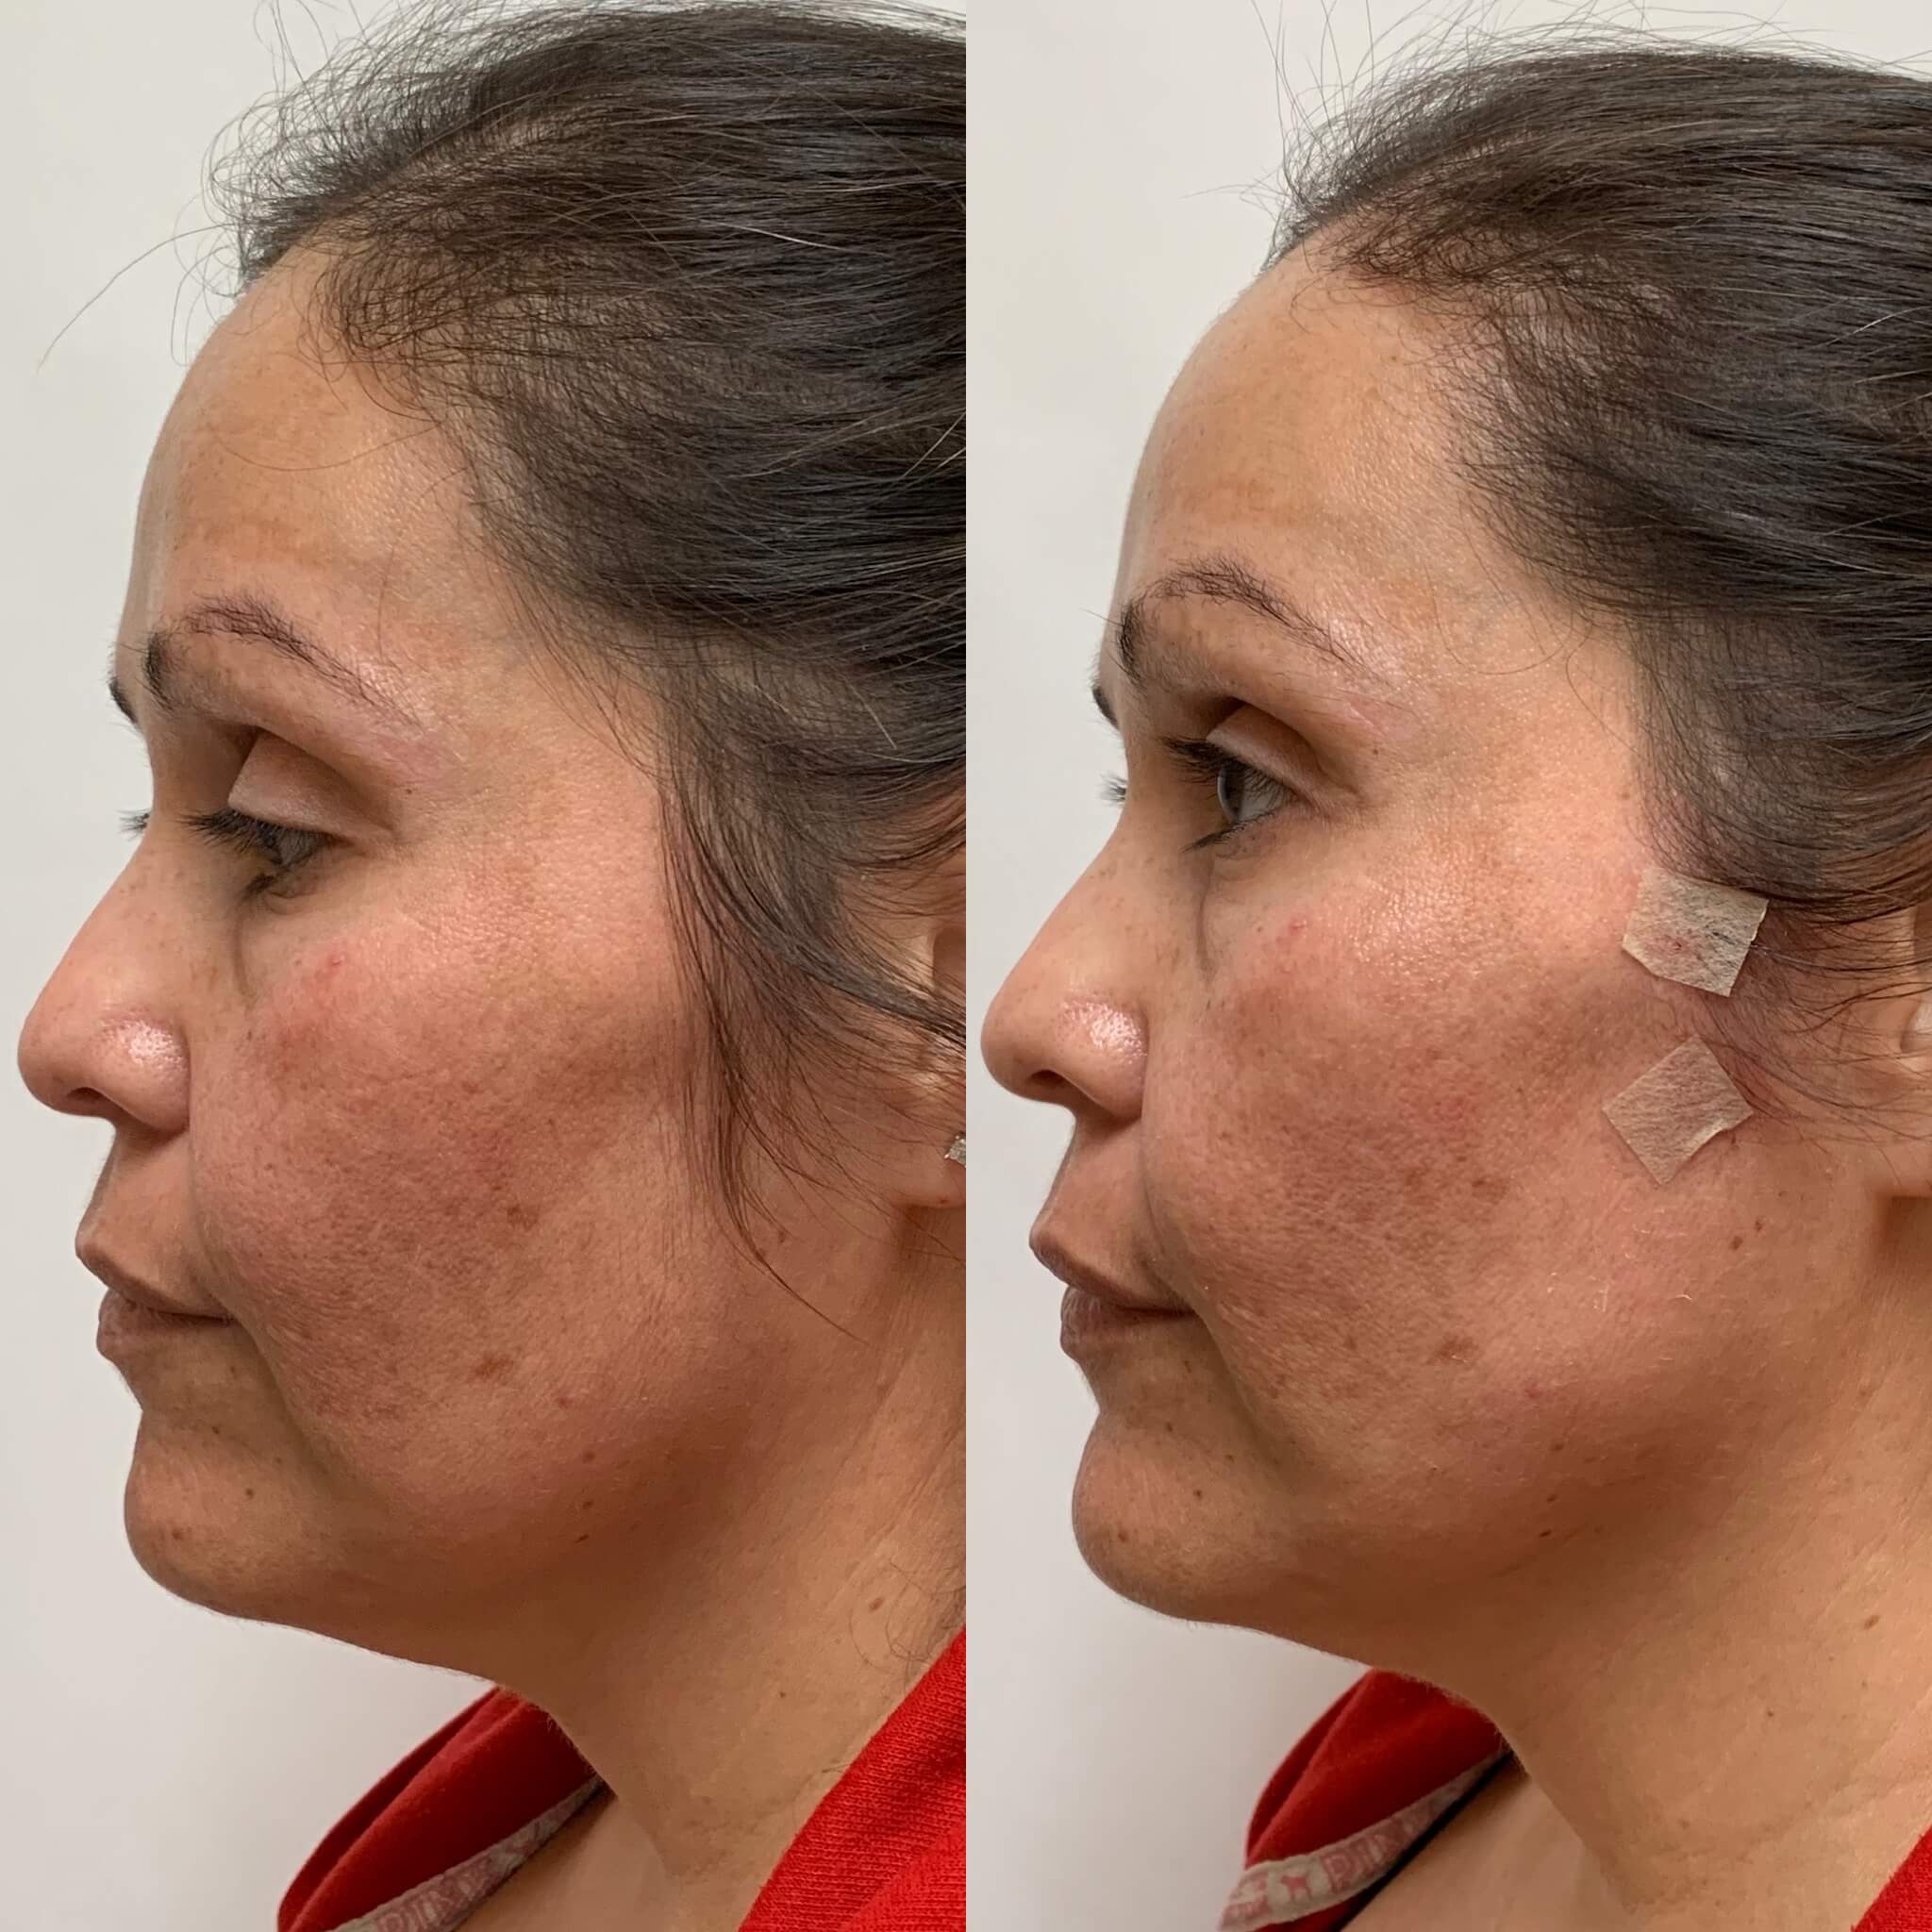 Before and After PDO Thread lift Treatment | Beauty Boost Med Spa in Newport Beach, CA